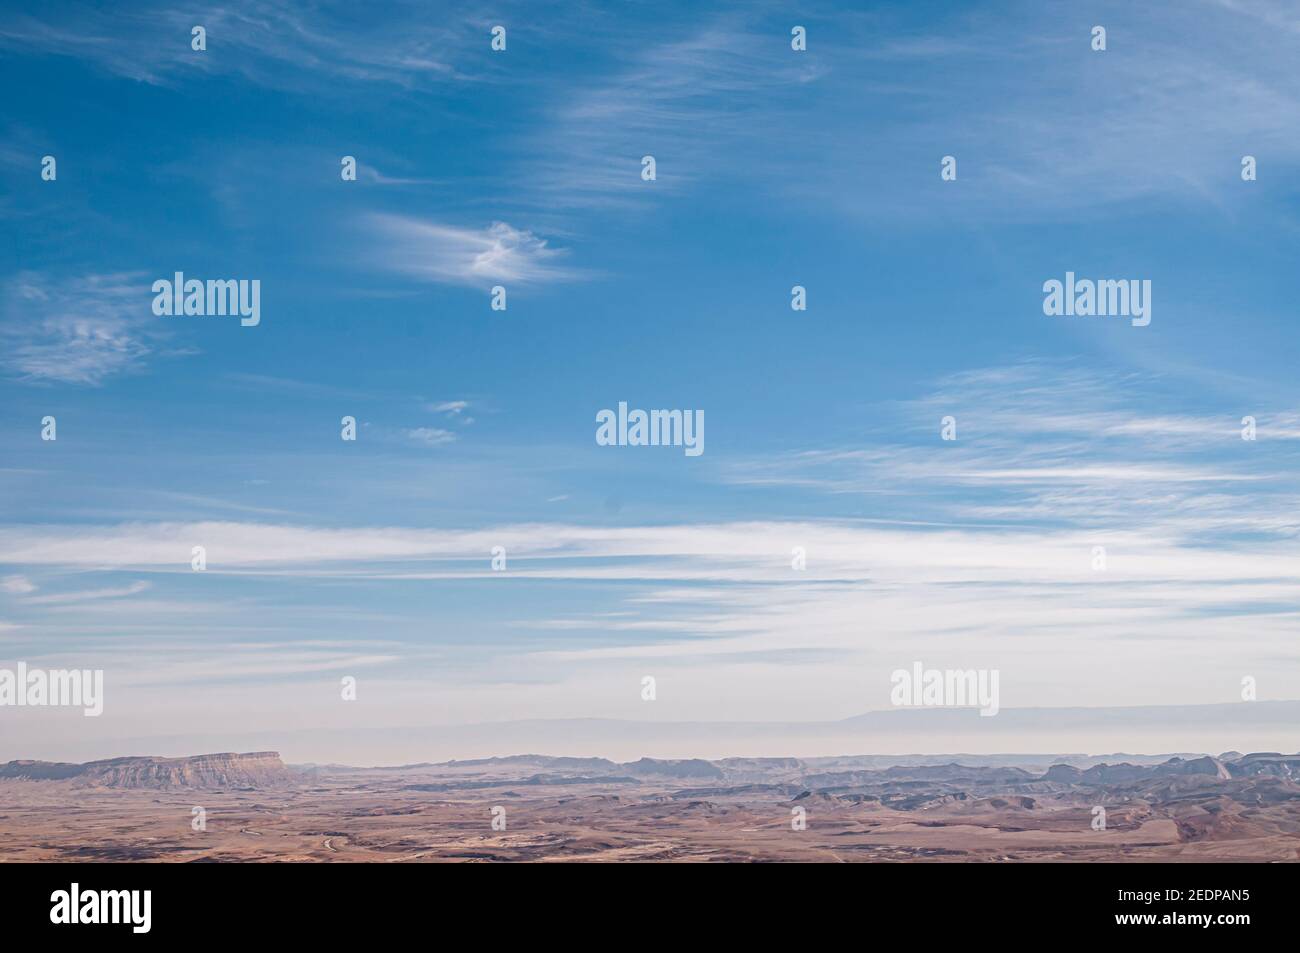 Blue desert sky background with light high, white, feather clouds Photographed in the Negev Desert, Israel in February Stock Photo